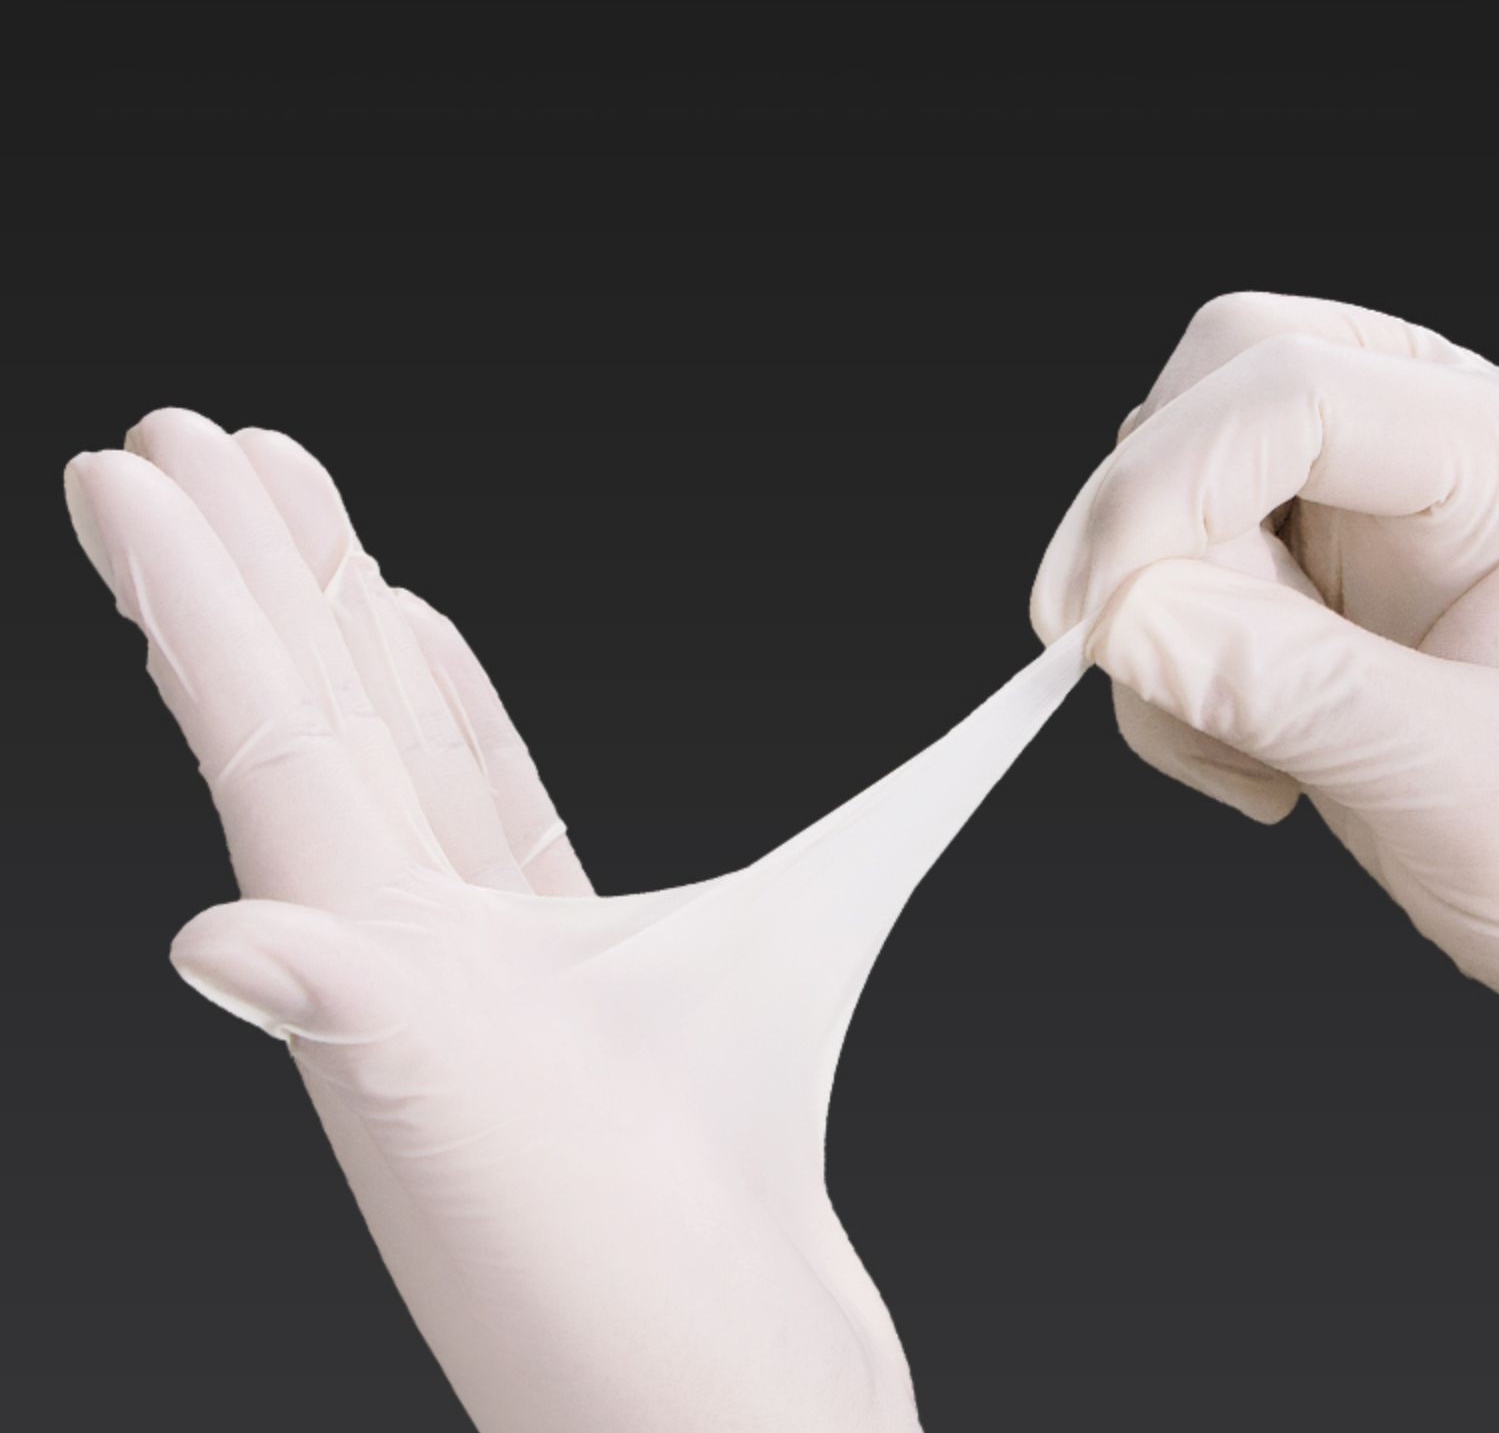 Latex Examiantion Gloves For Medical